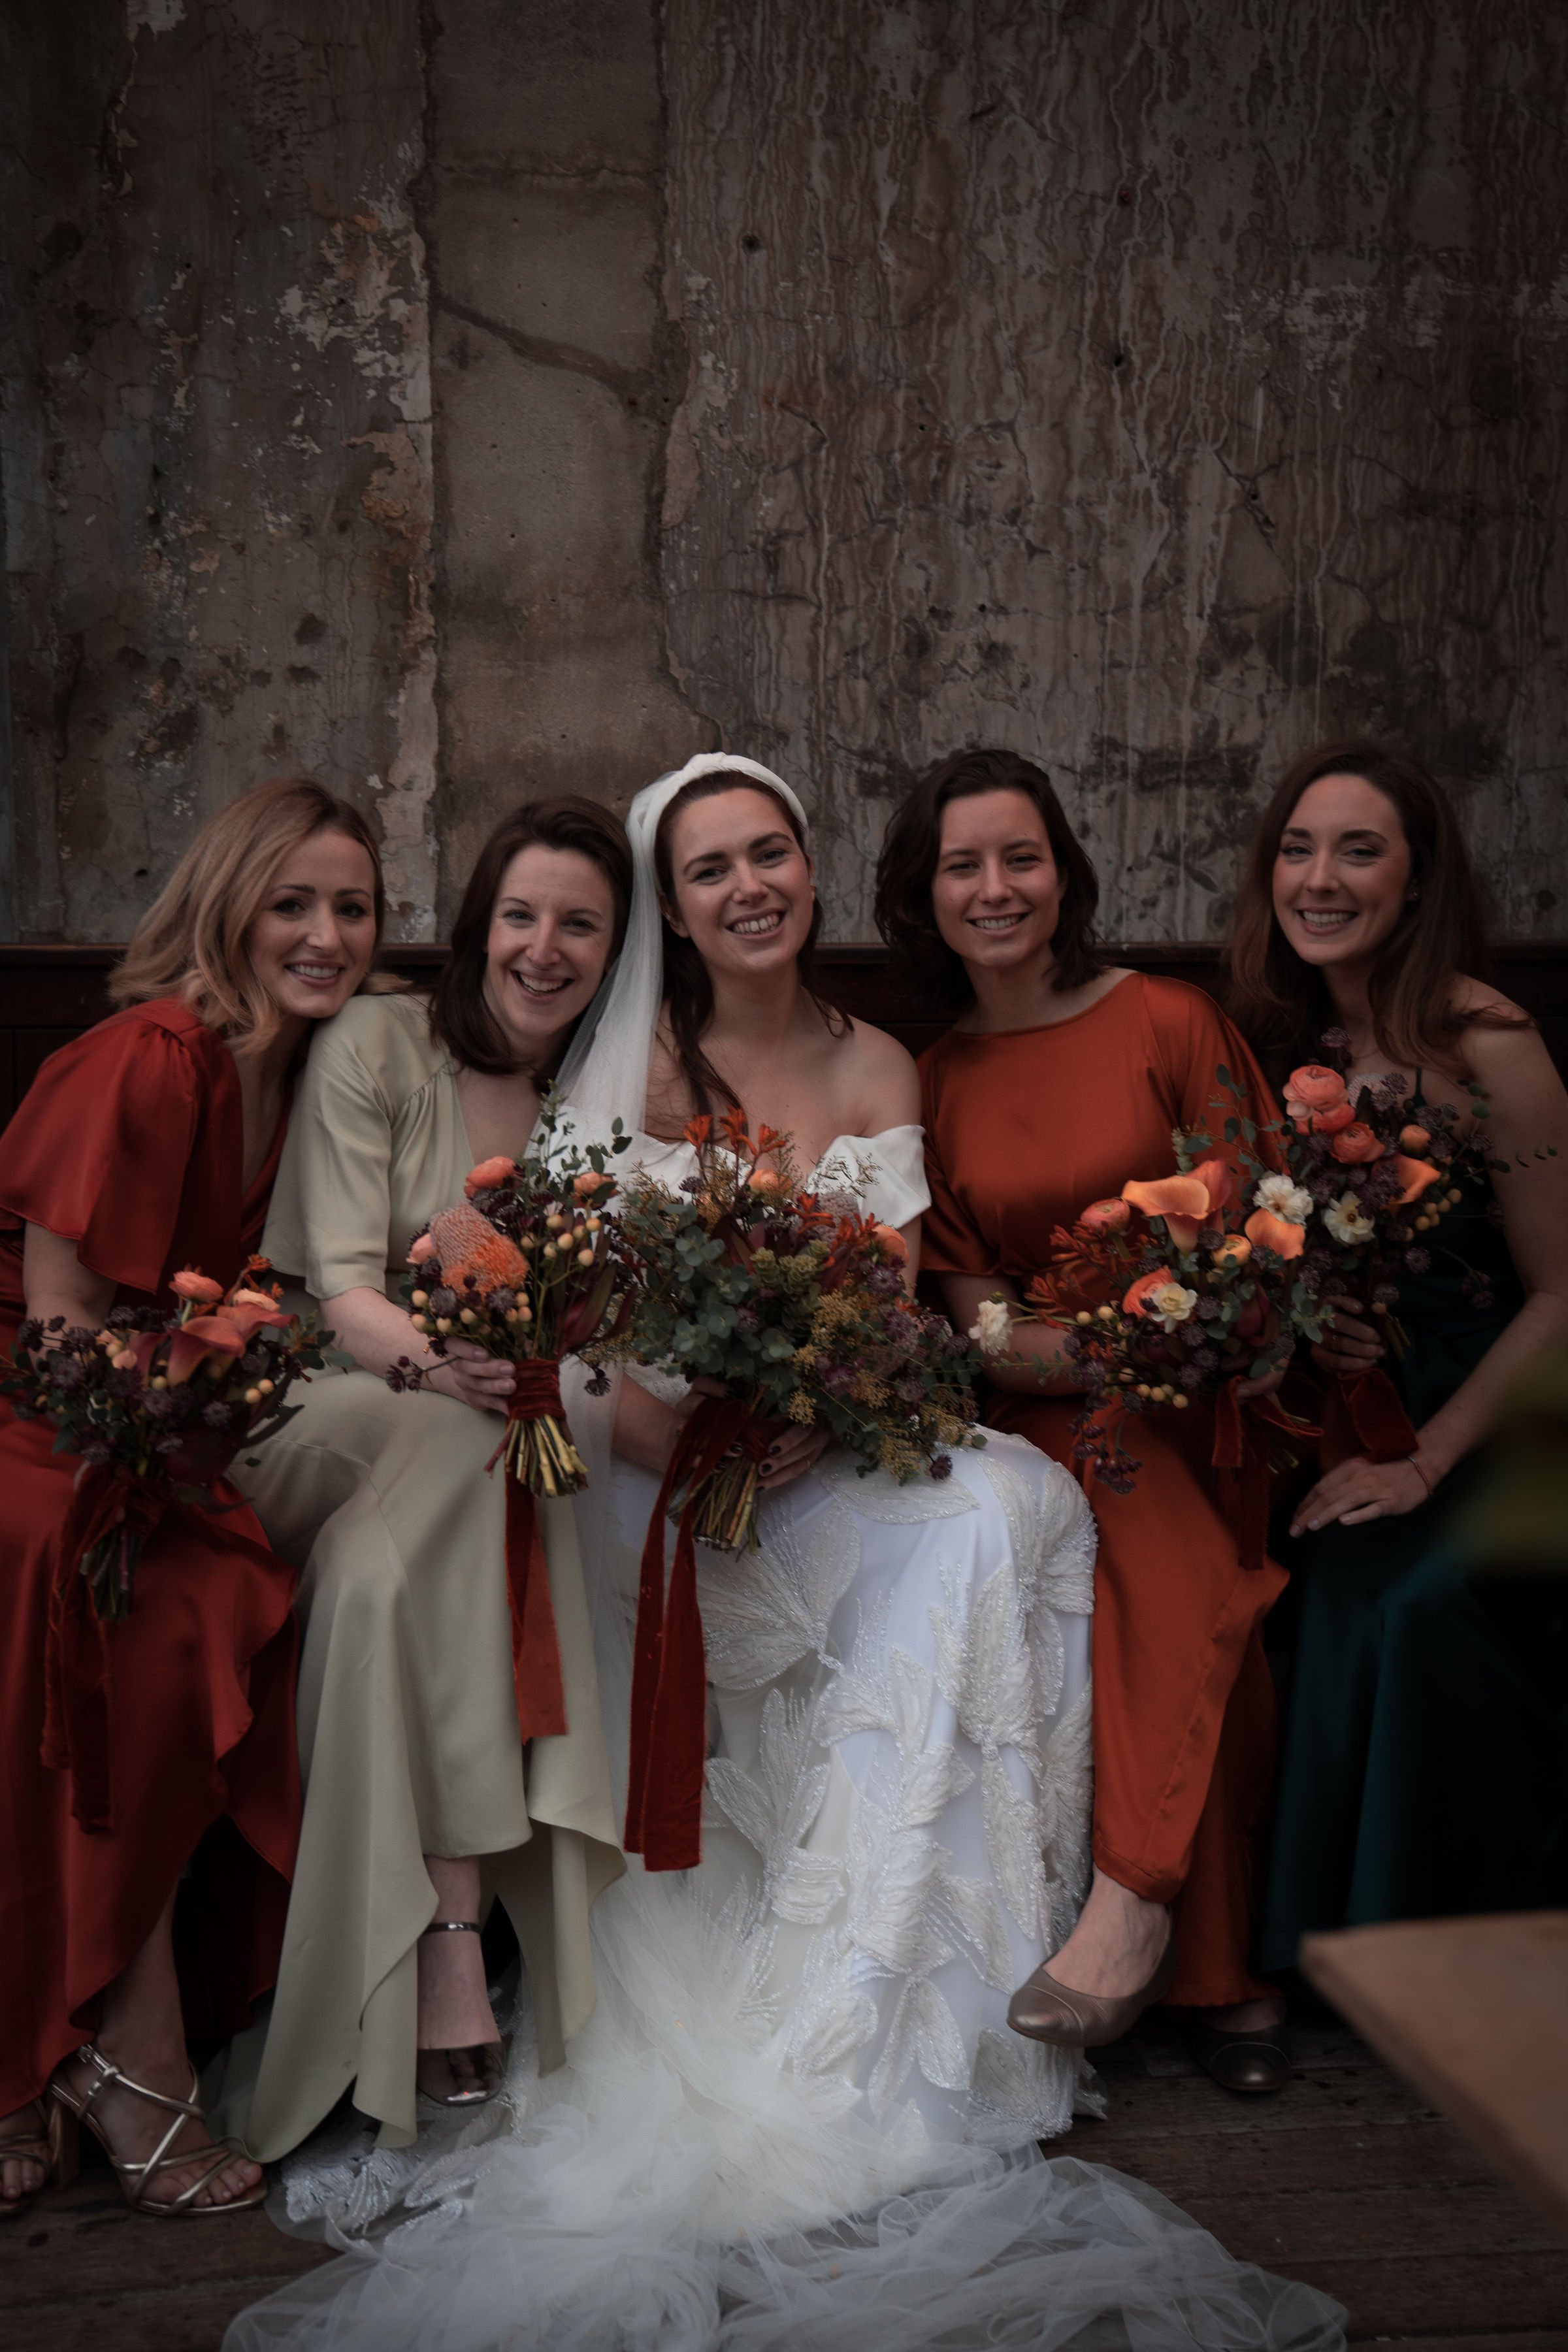 Beautiful bride Natalie wore the Daffodil wedding dress and Maple skirt by Halfpenny London